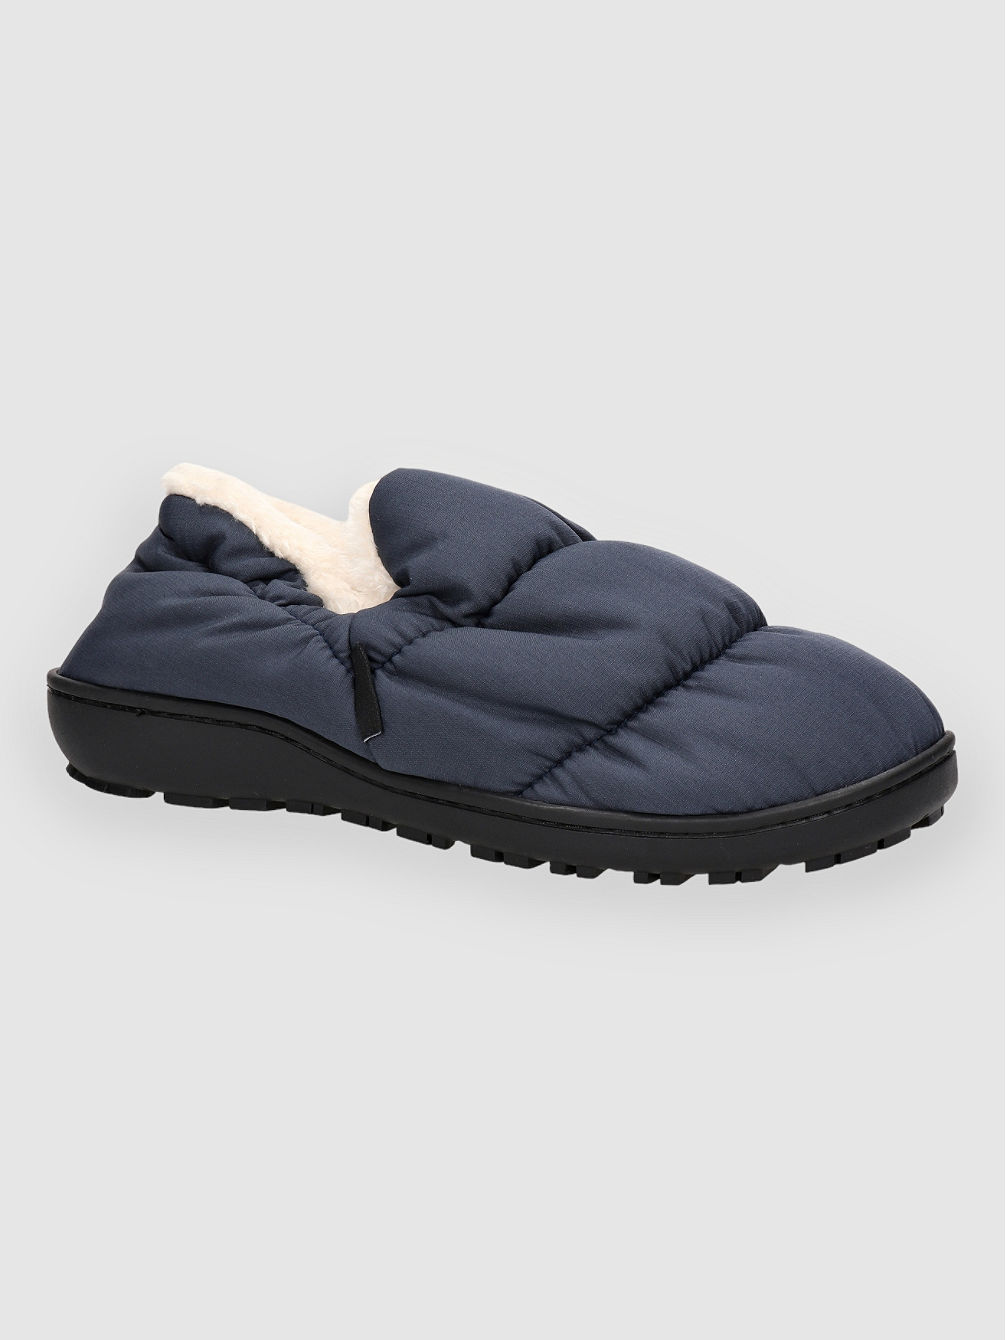 Cloudtouch Slipper Winter Shoes